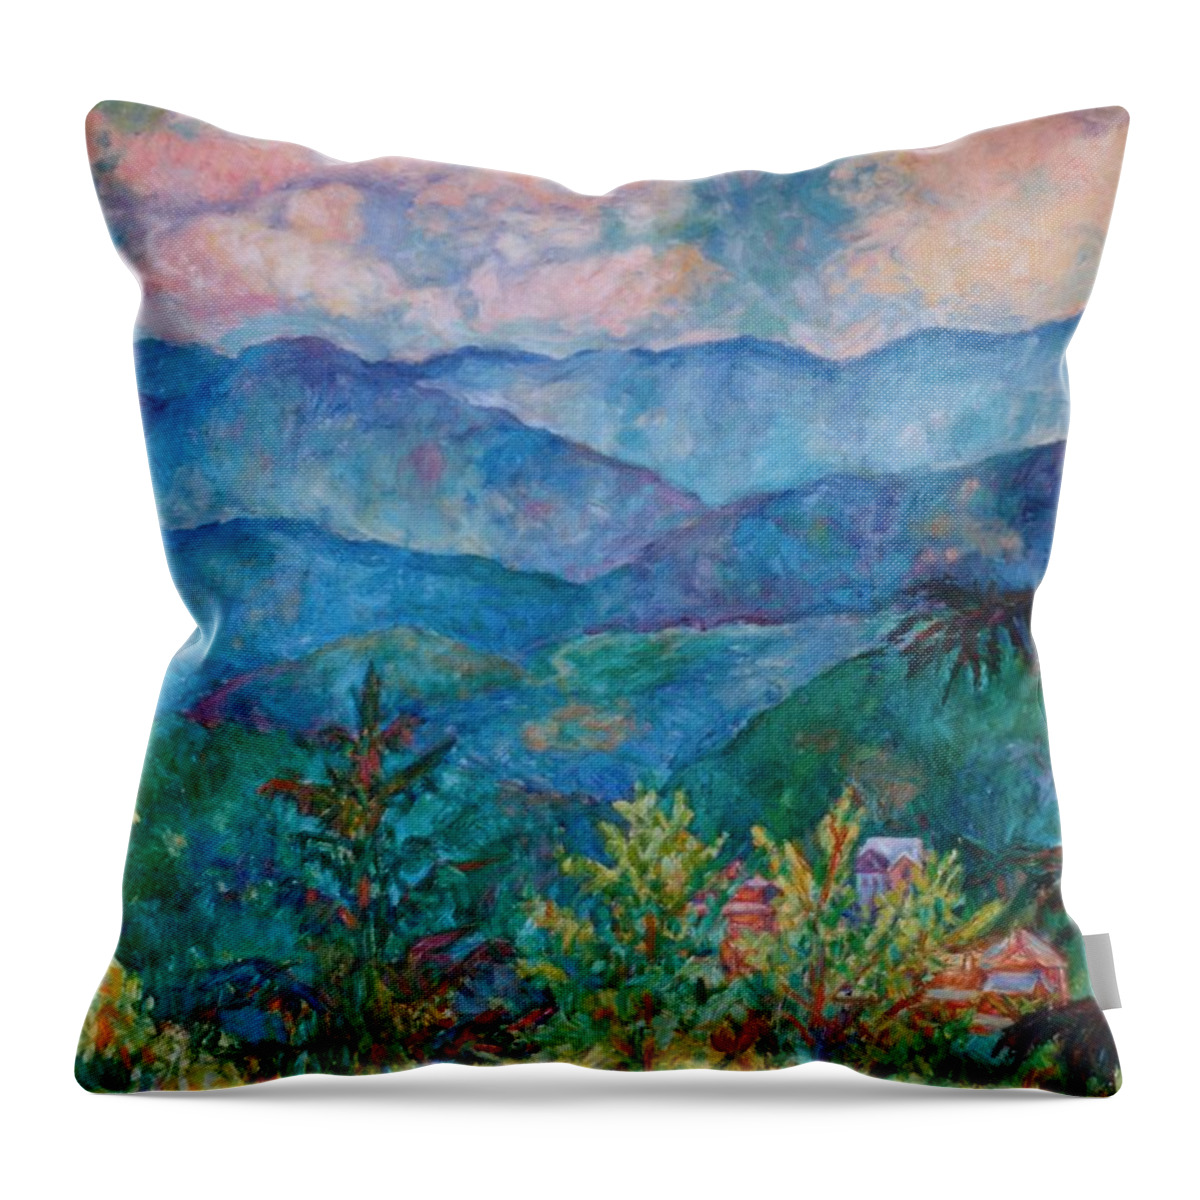 Smoky Mountains Throw Pillow featuring the painting The Smoky Mountains by Kendall Kessler